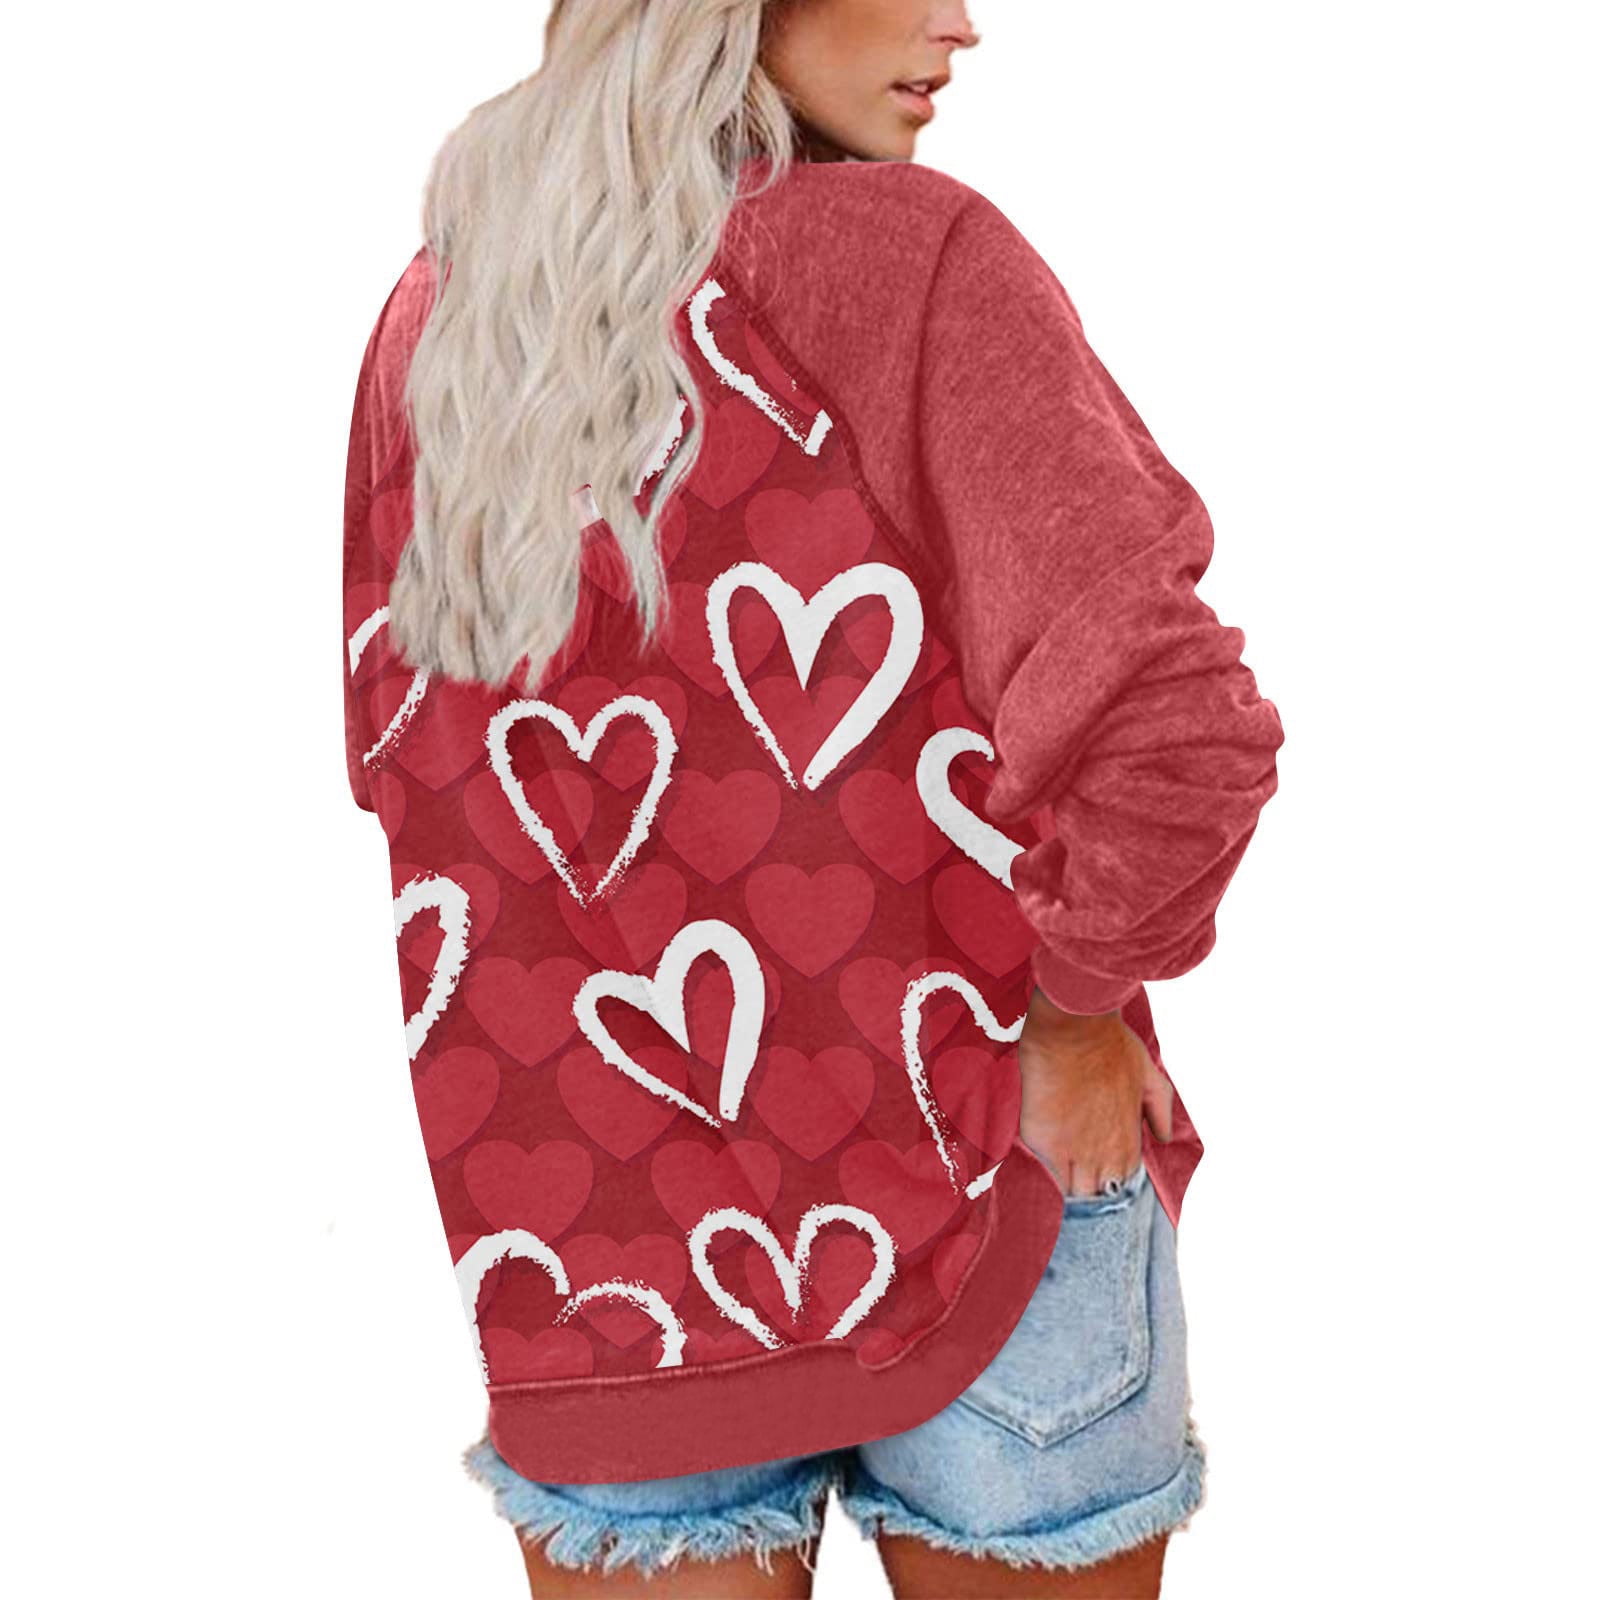 Valentine's Day Sweatshirt Women Letter Graphic Print Long Sleeve Cute  Pullover Casual Tunic Tops Crew Neck T Shirt（Orange,S) 